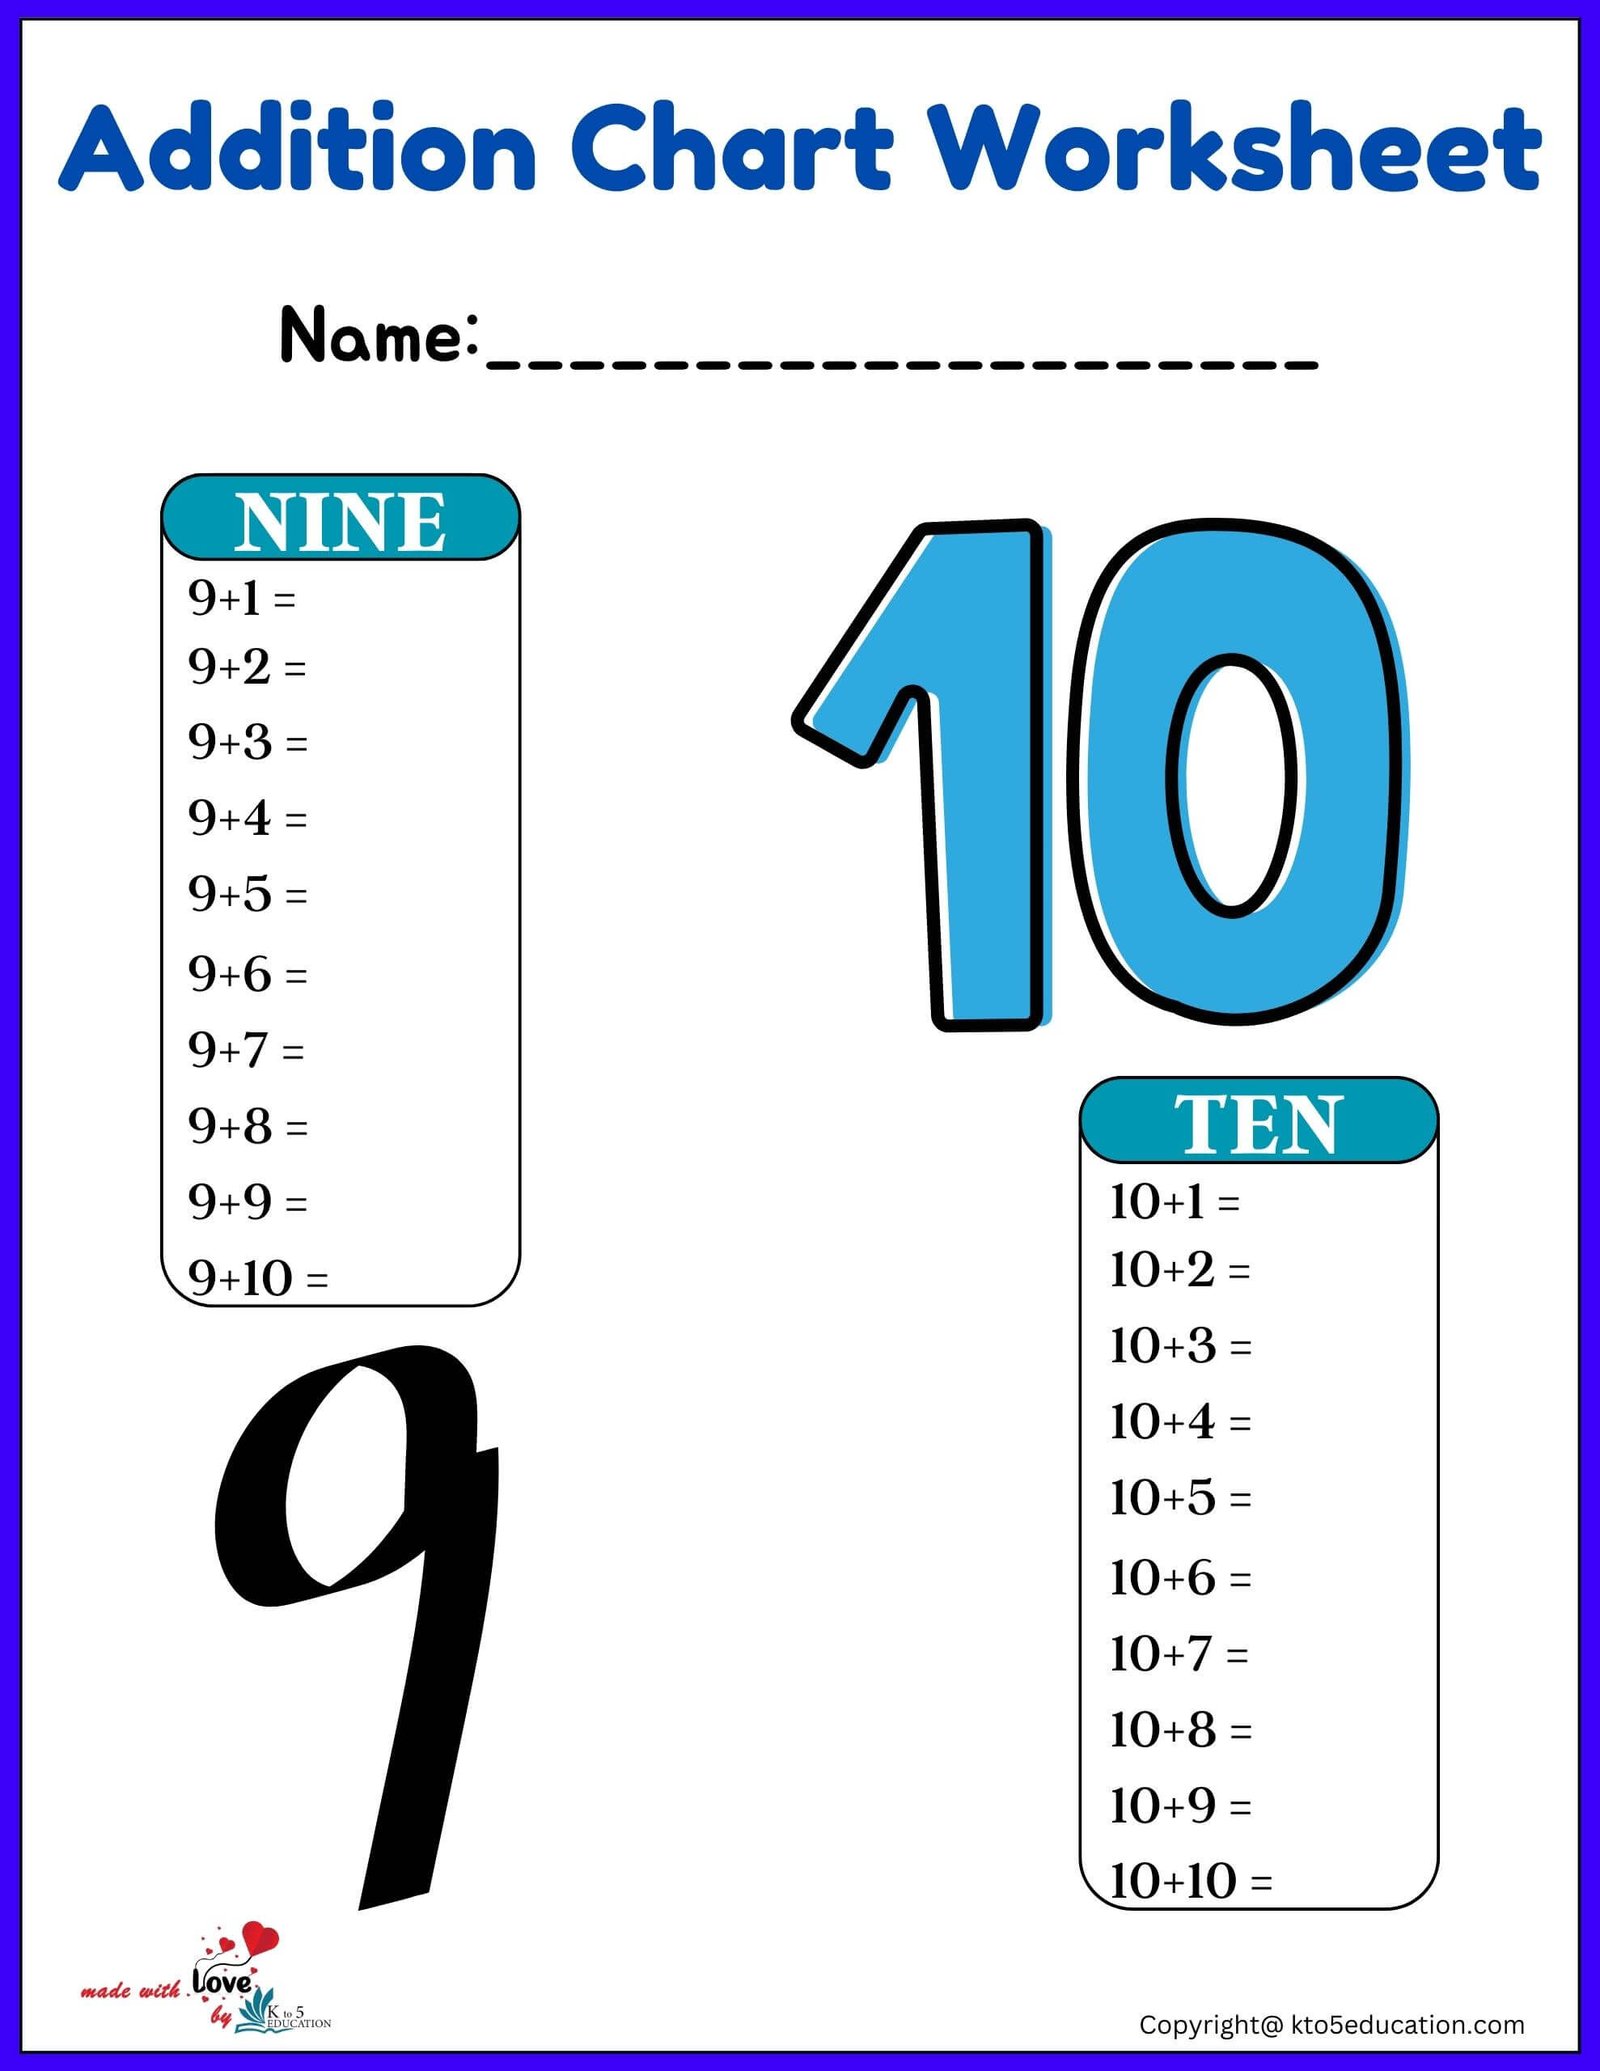 Free Additions Charts Worksheets